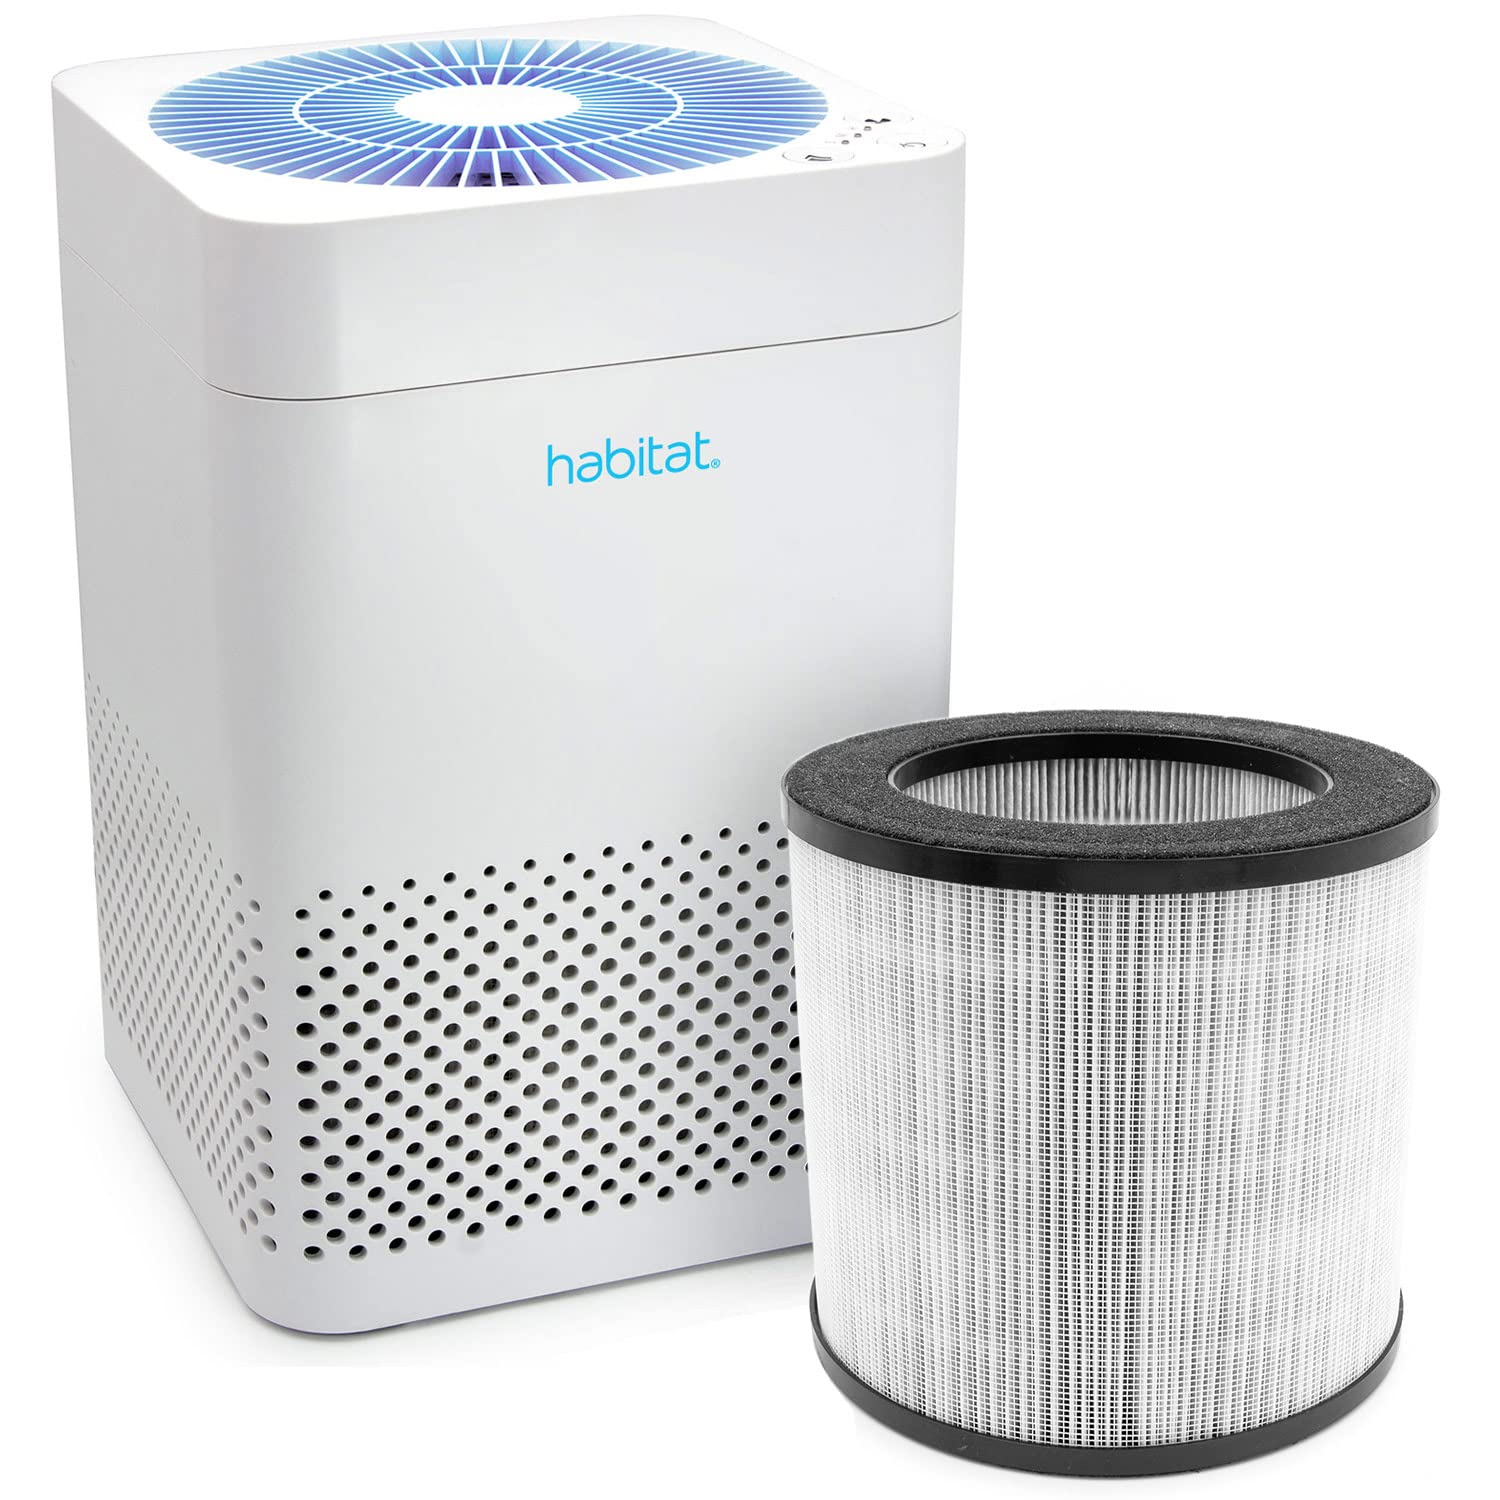 Habitat 150A(e) True HEPA Filtration Air Filter System, Realtime Air Quality Sensor, Covers up to 150ft², Removes 99.97% of Airborne Particles and Viruses, Long-Lasting Filter, Quiet Fan Mode